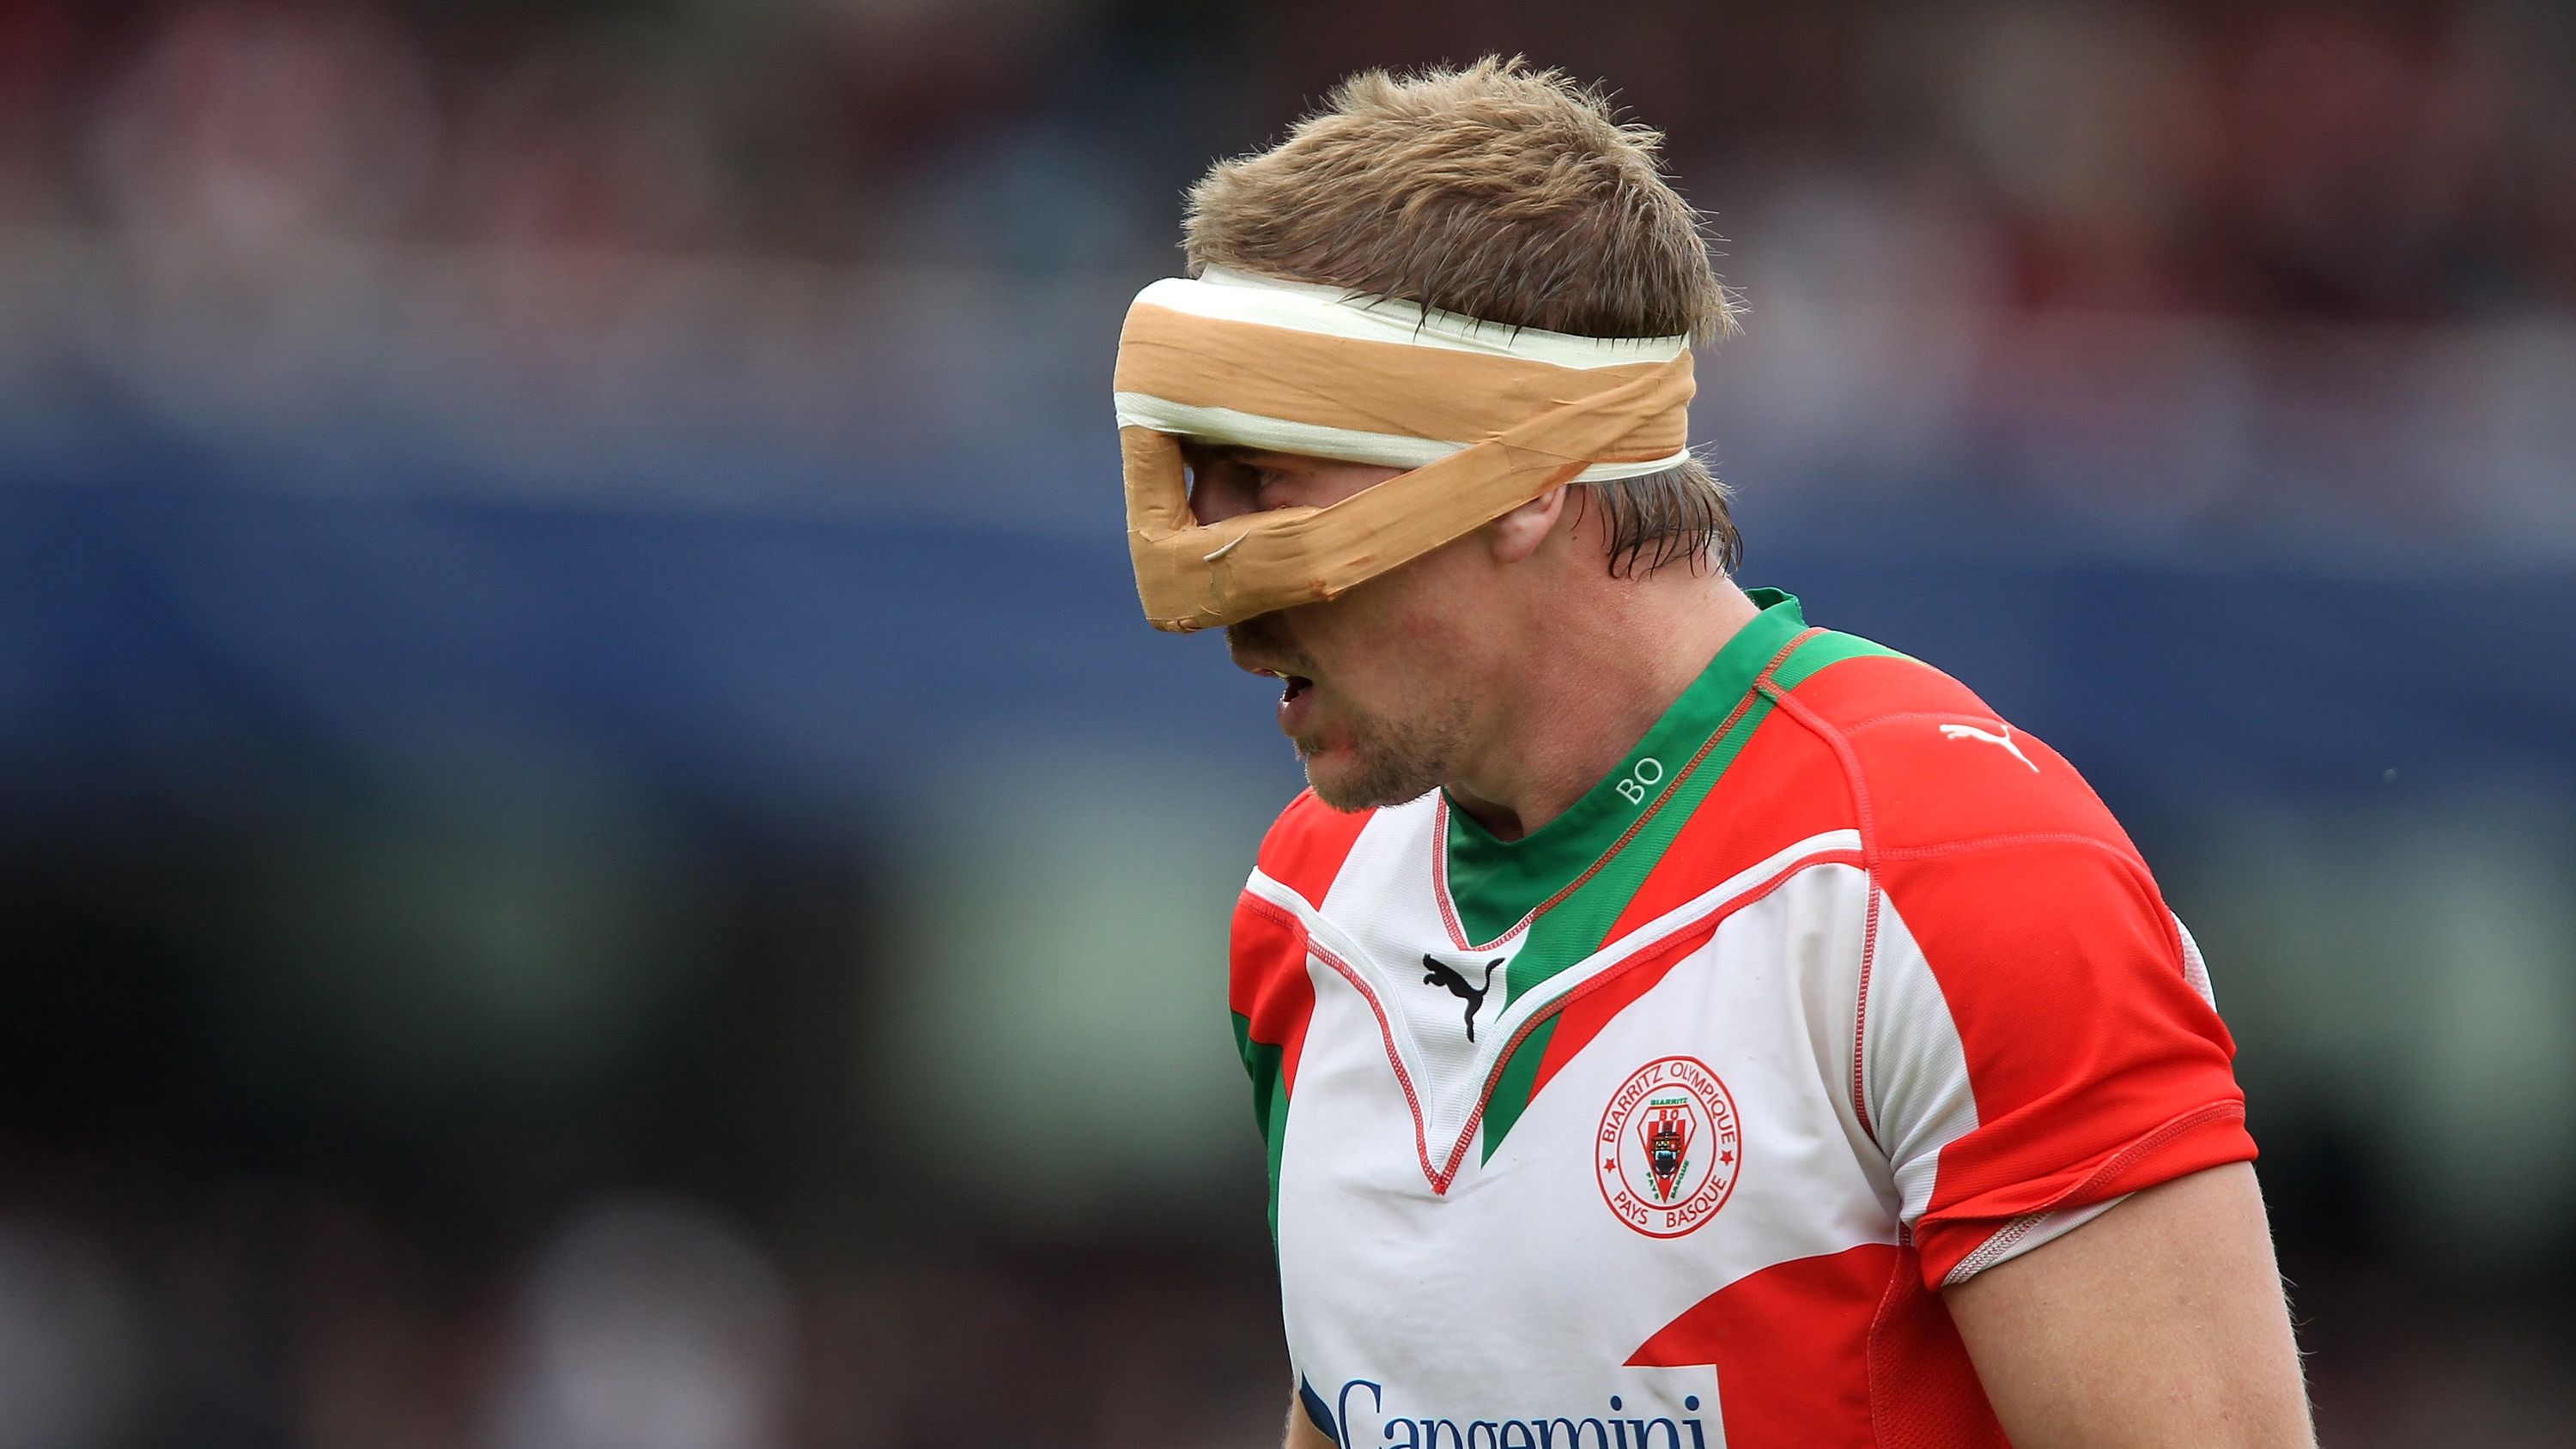 Imanol Harinordoquy of Biarritz wears a face protector in 2010.